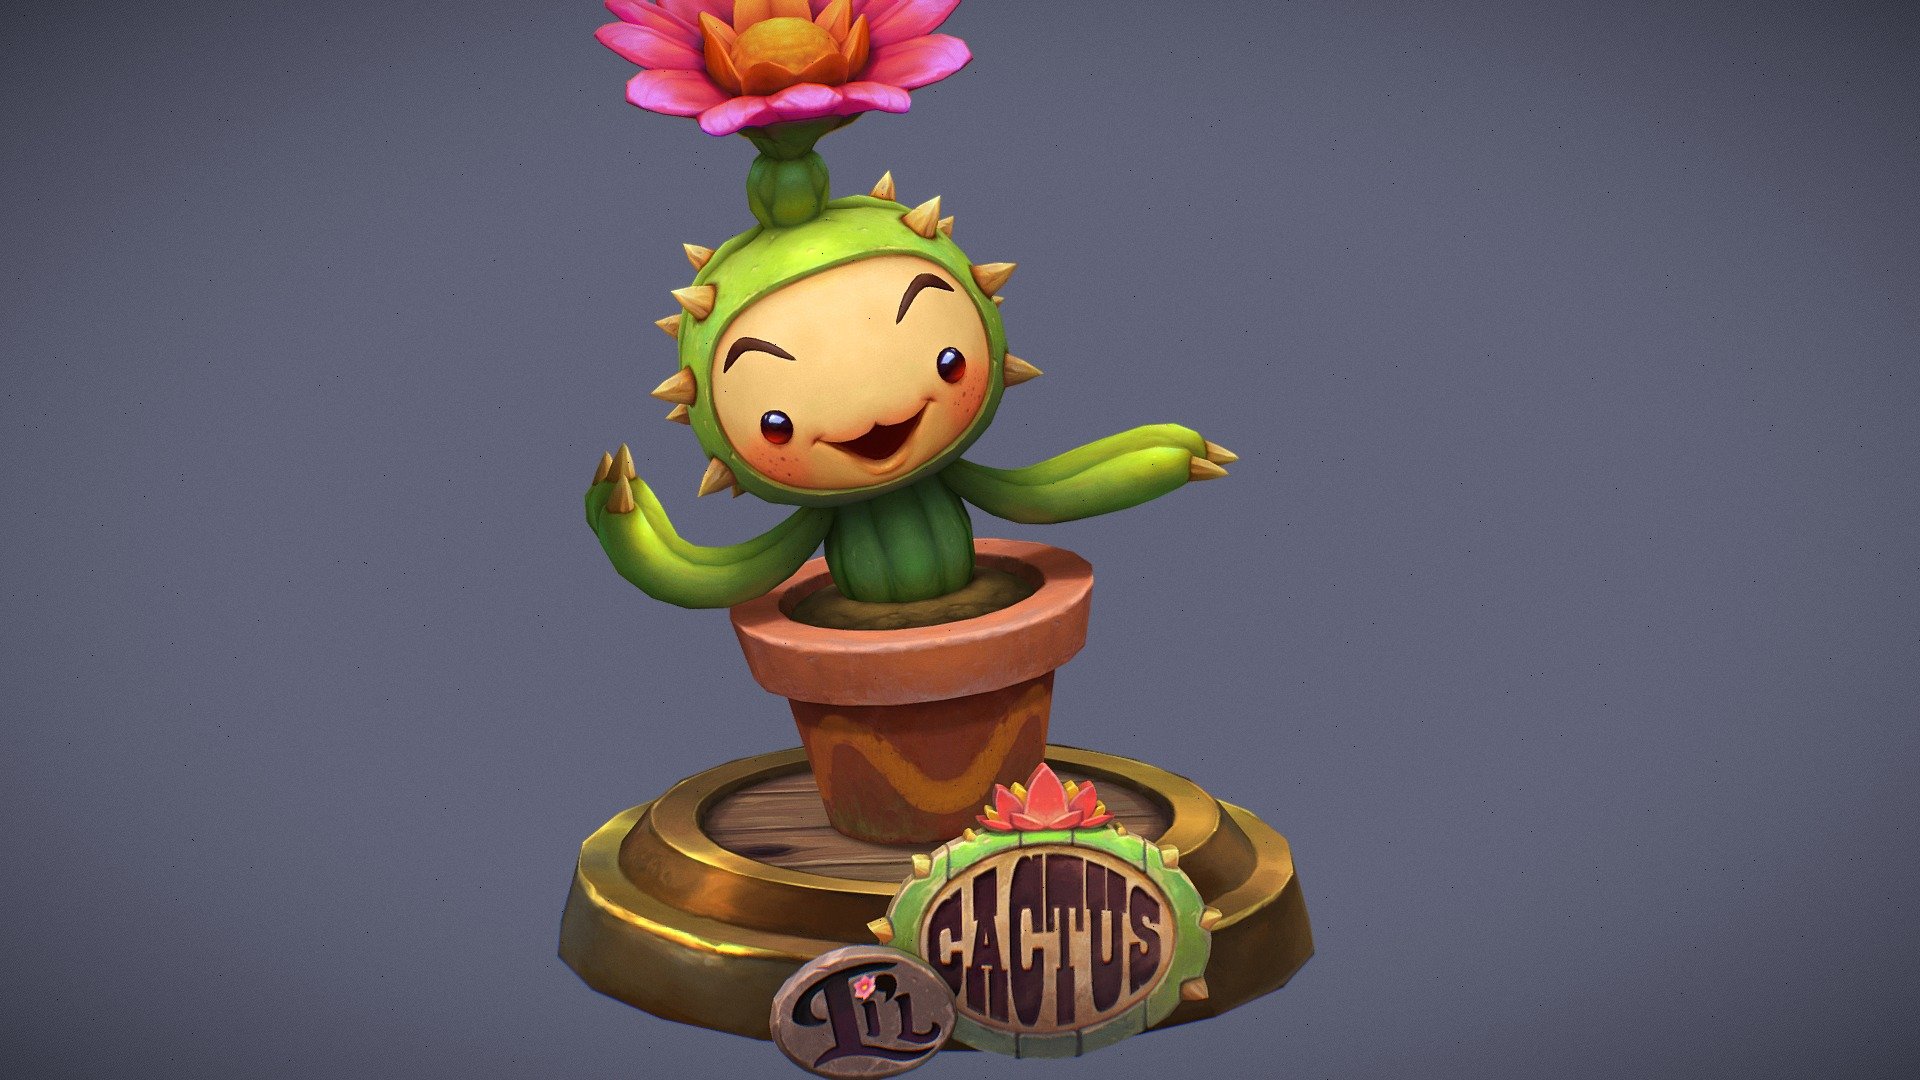 Hello everyone! here is my first post! I made a fan art of one of my favorite Legend of mana characters Little cactus! hope you like it. Animation done by Ron pucherelli 3d model